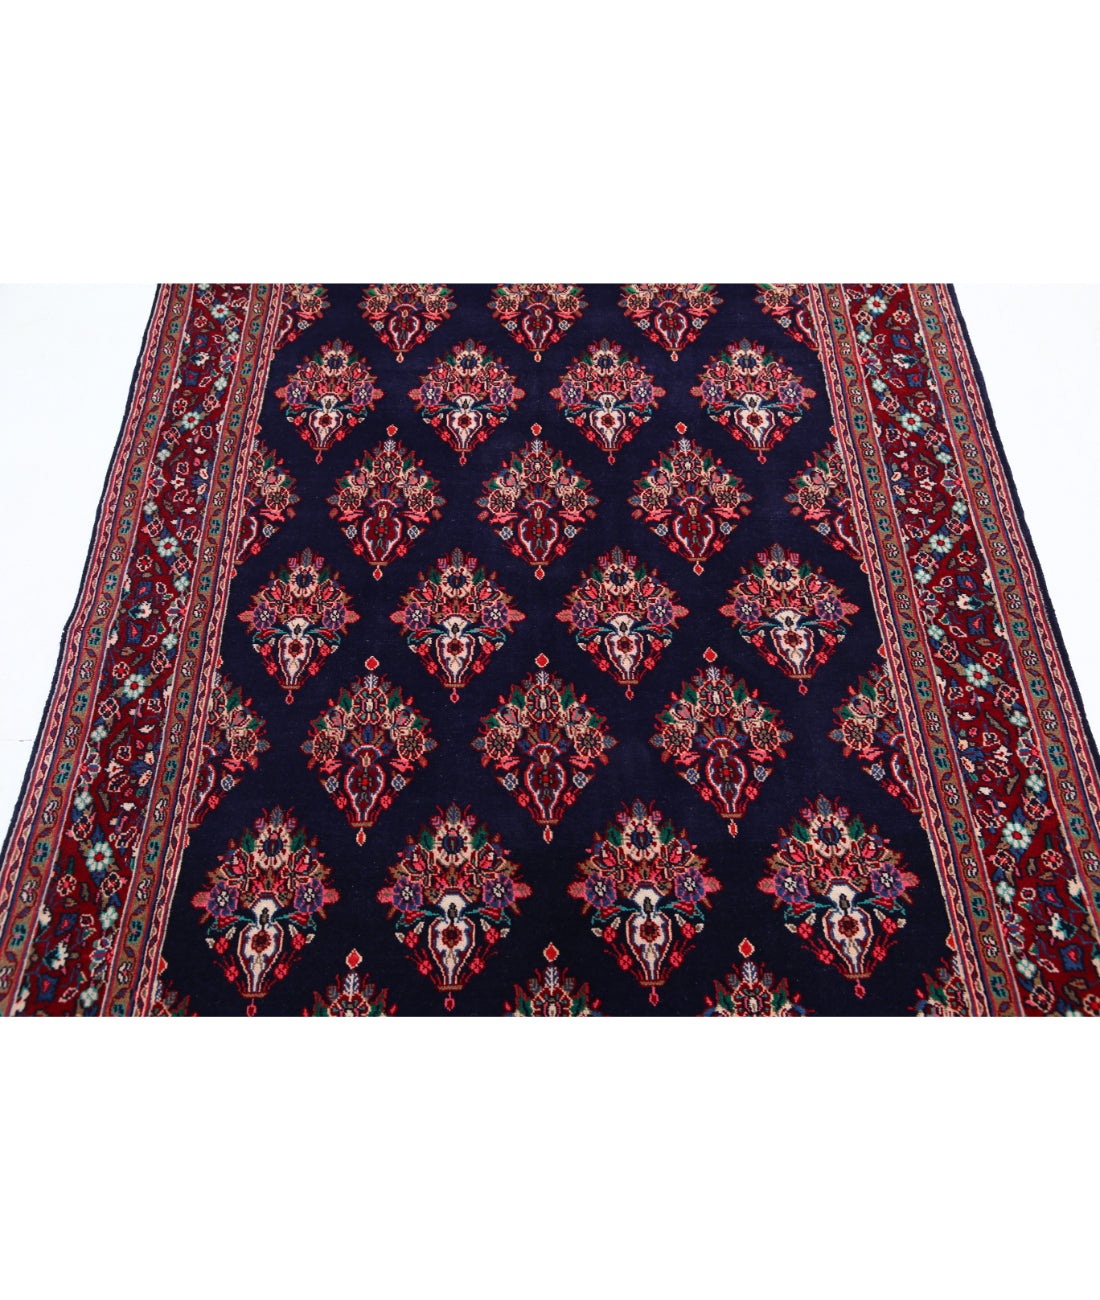 Hand Knotted Persian Kashan Wool Rug - 4'4'' x 6'9'' 4'4'' x 6'9'' (130 X 203) / Blue / Red